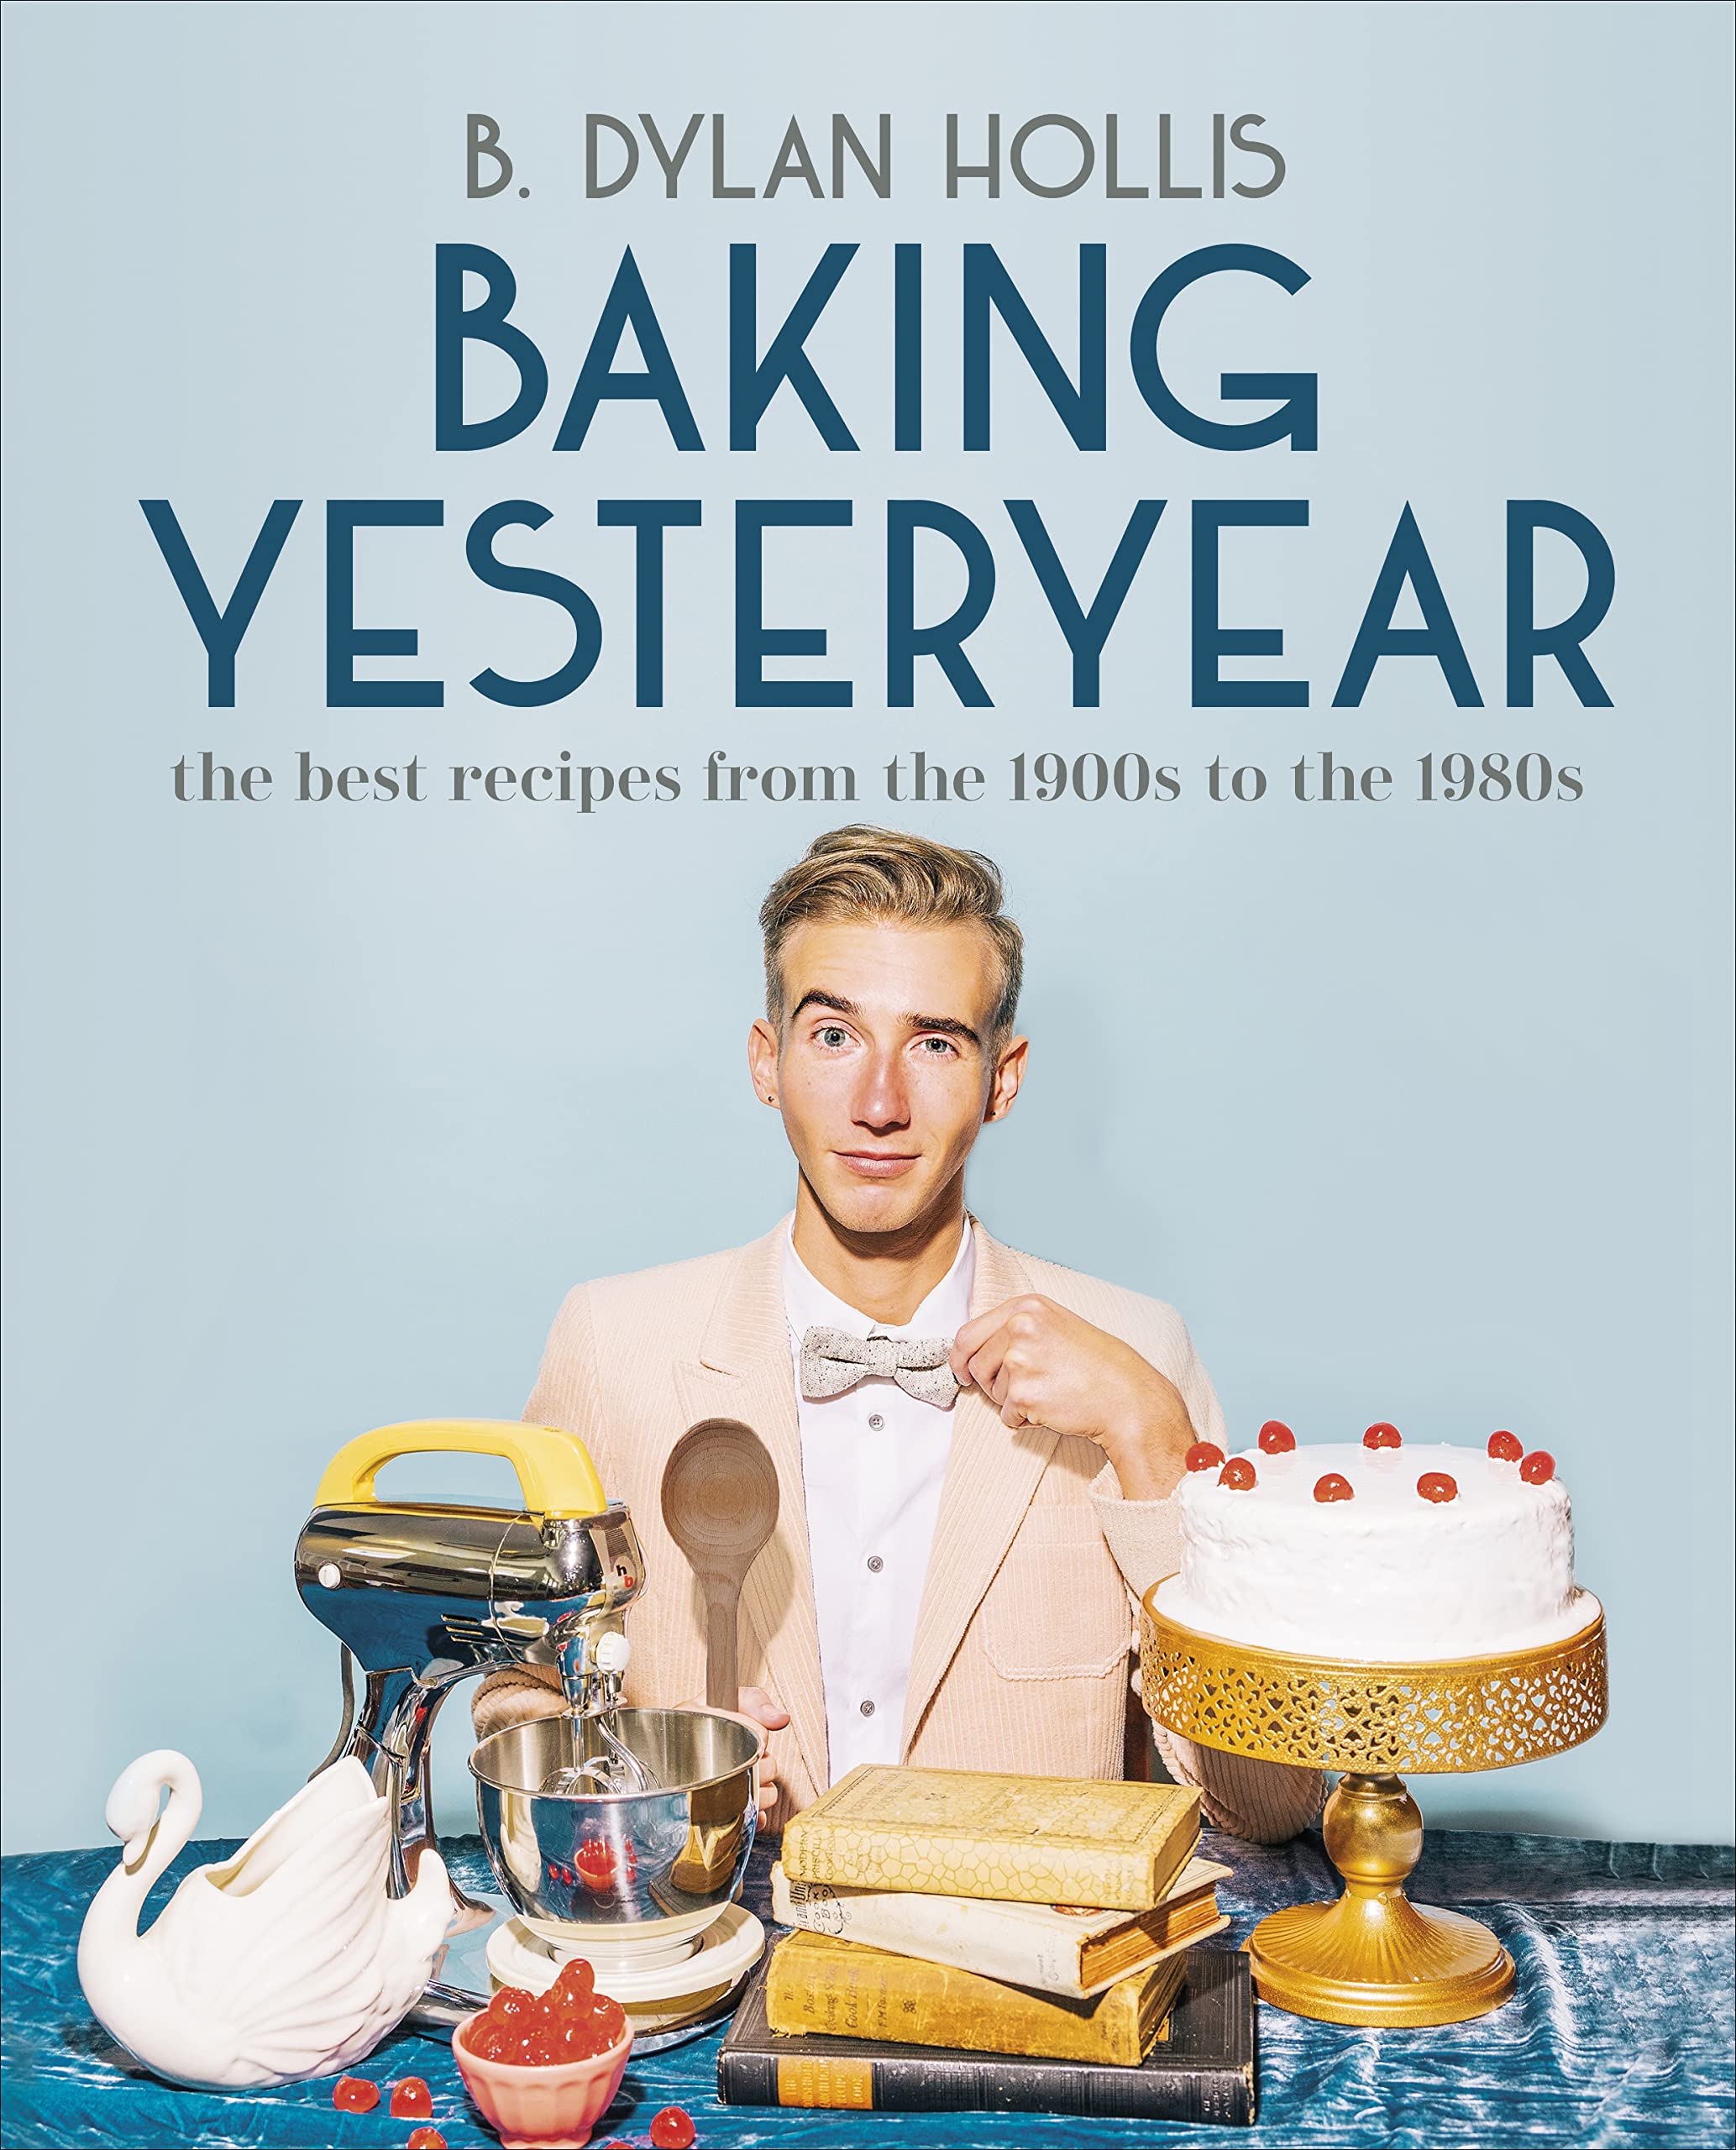 Baking Yesteryear: The Best Recipes from the 1900s to the 1980s (B. Dylan Hollis)